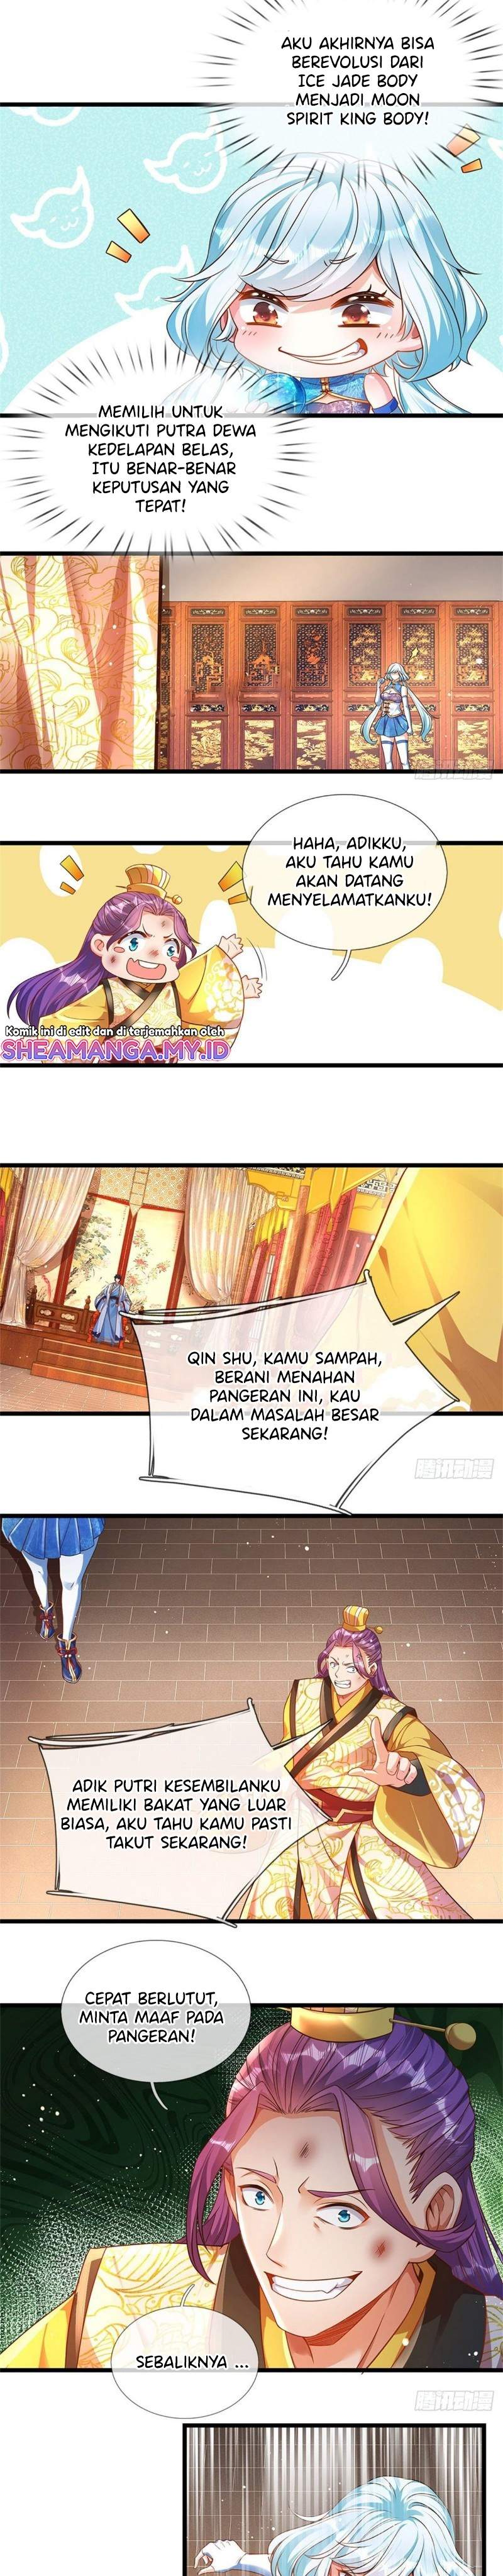 Star Sign In To Supreme Dantian Chapter 43